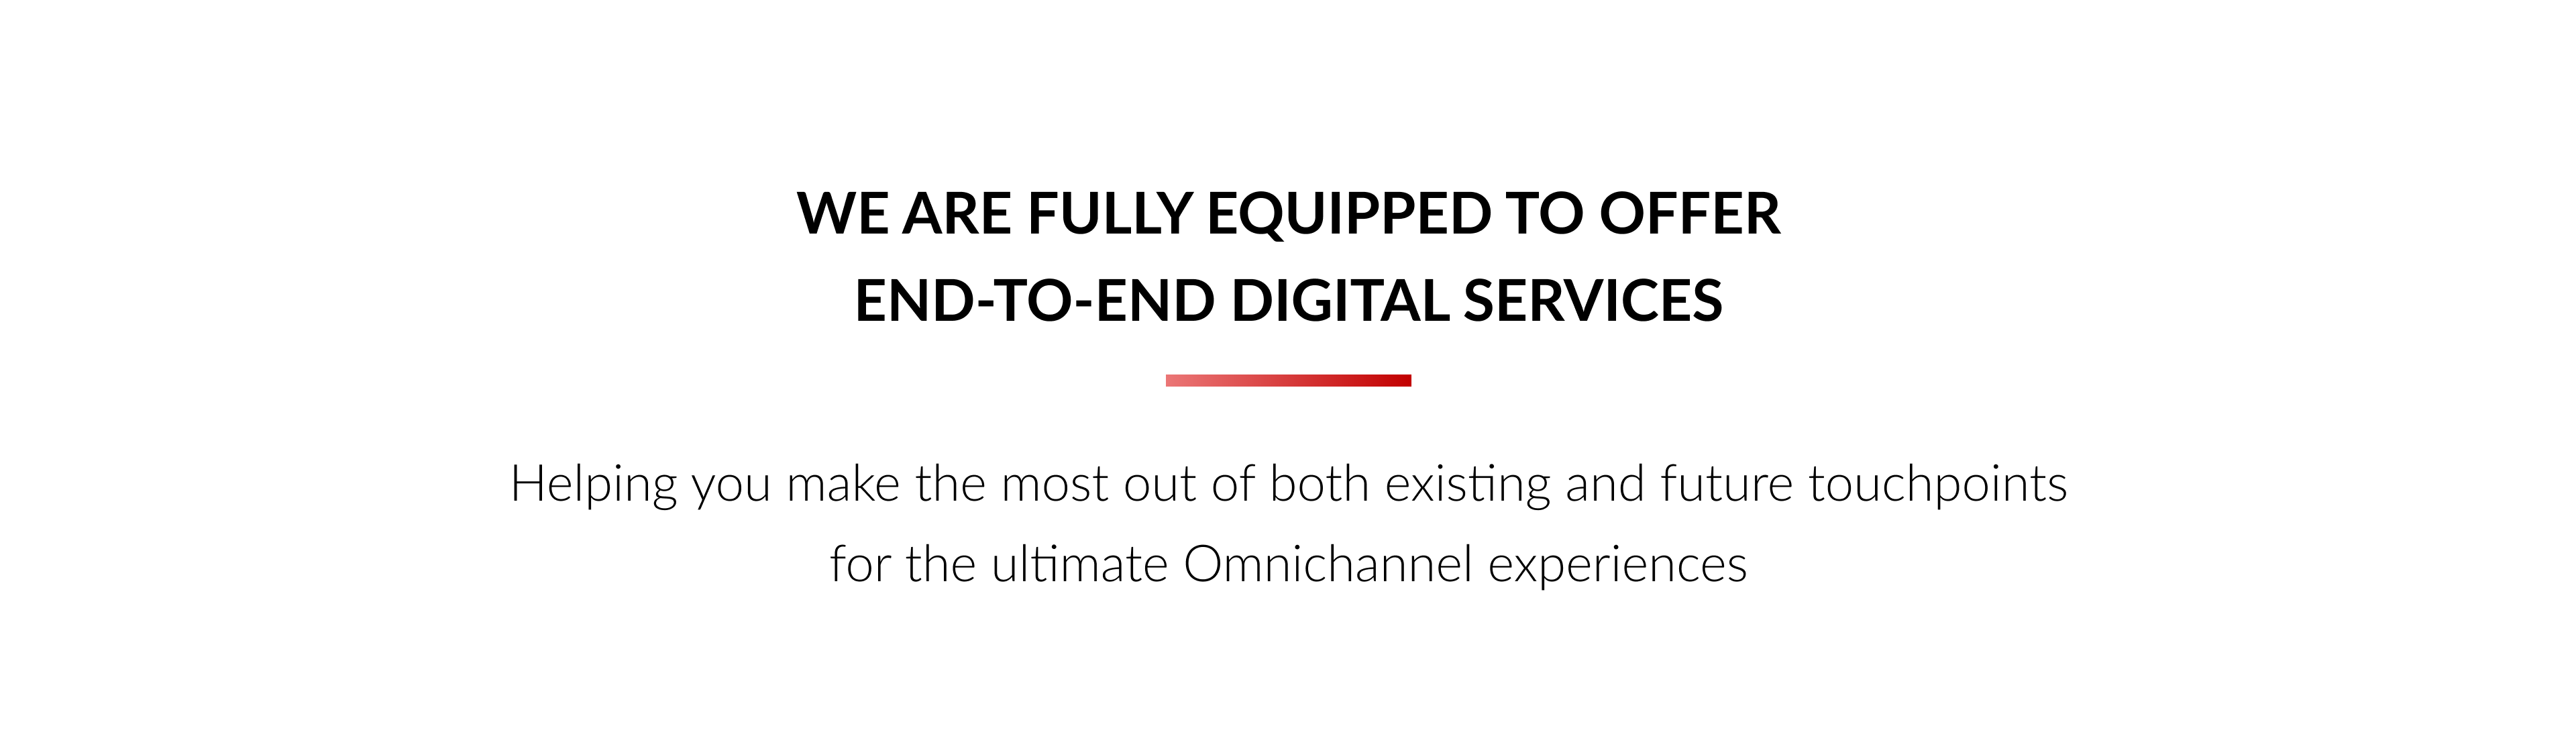 ITC is fully equipped to offer end-to-end digital services to help brands make the most out of both existing and future touchpoints for the ultimate Omnichannel experiences